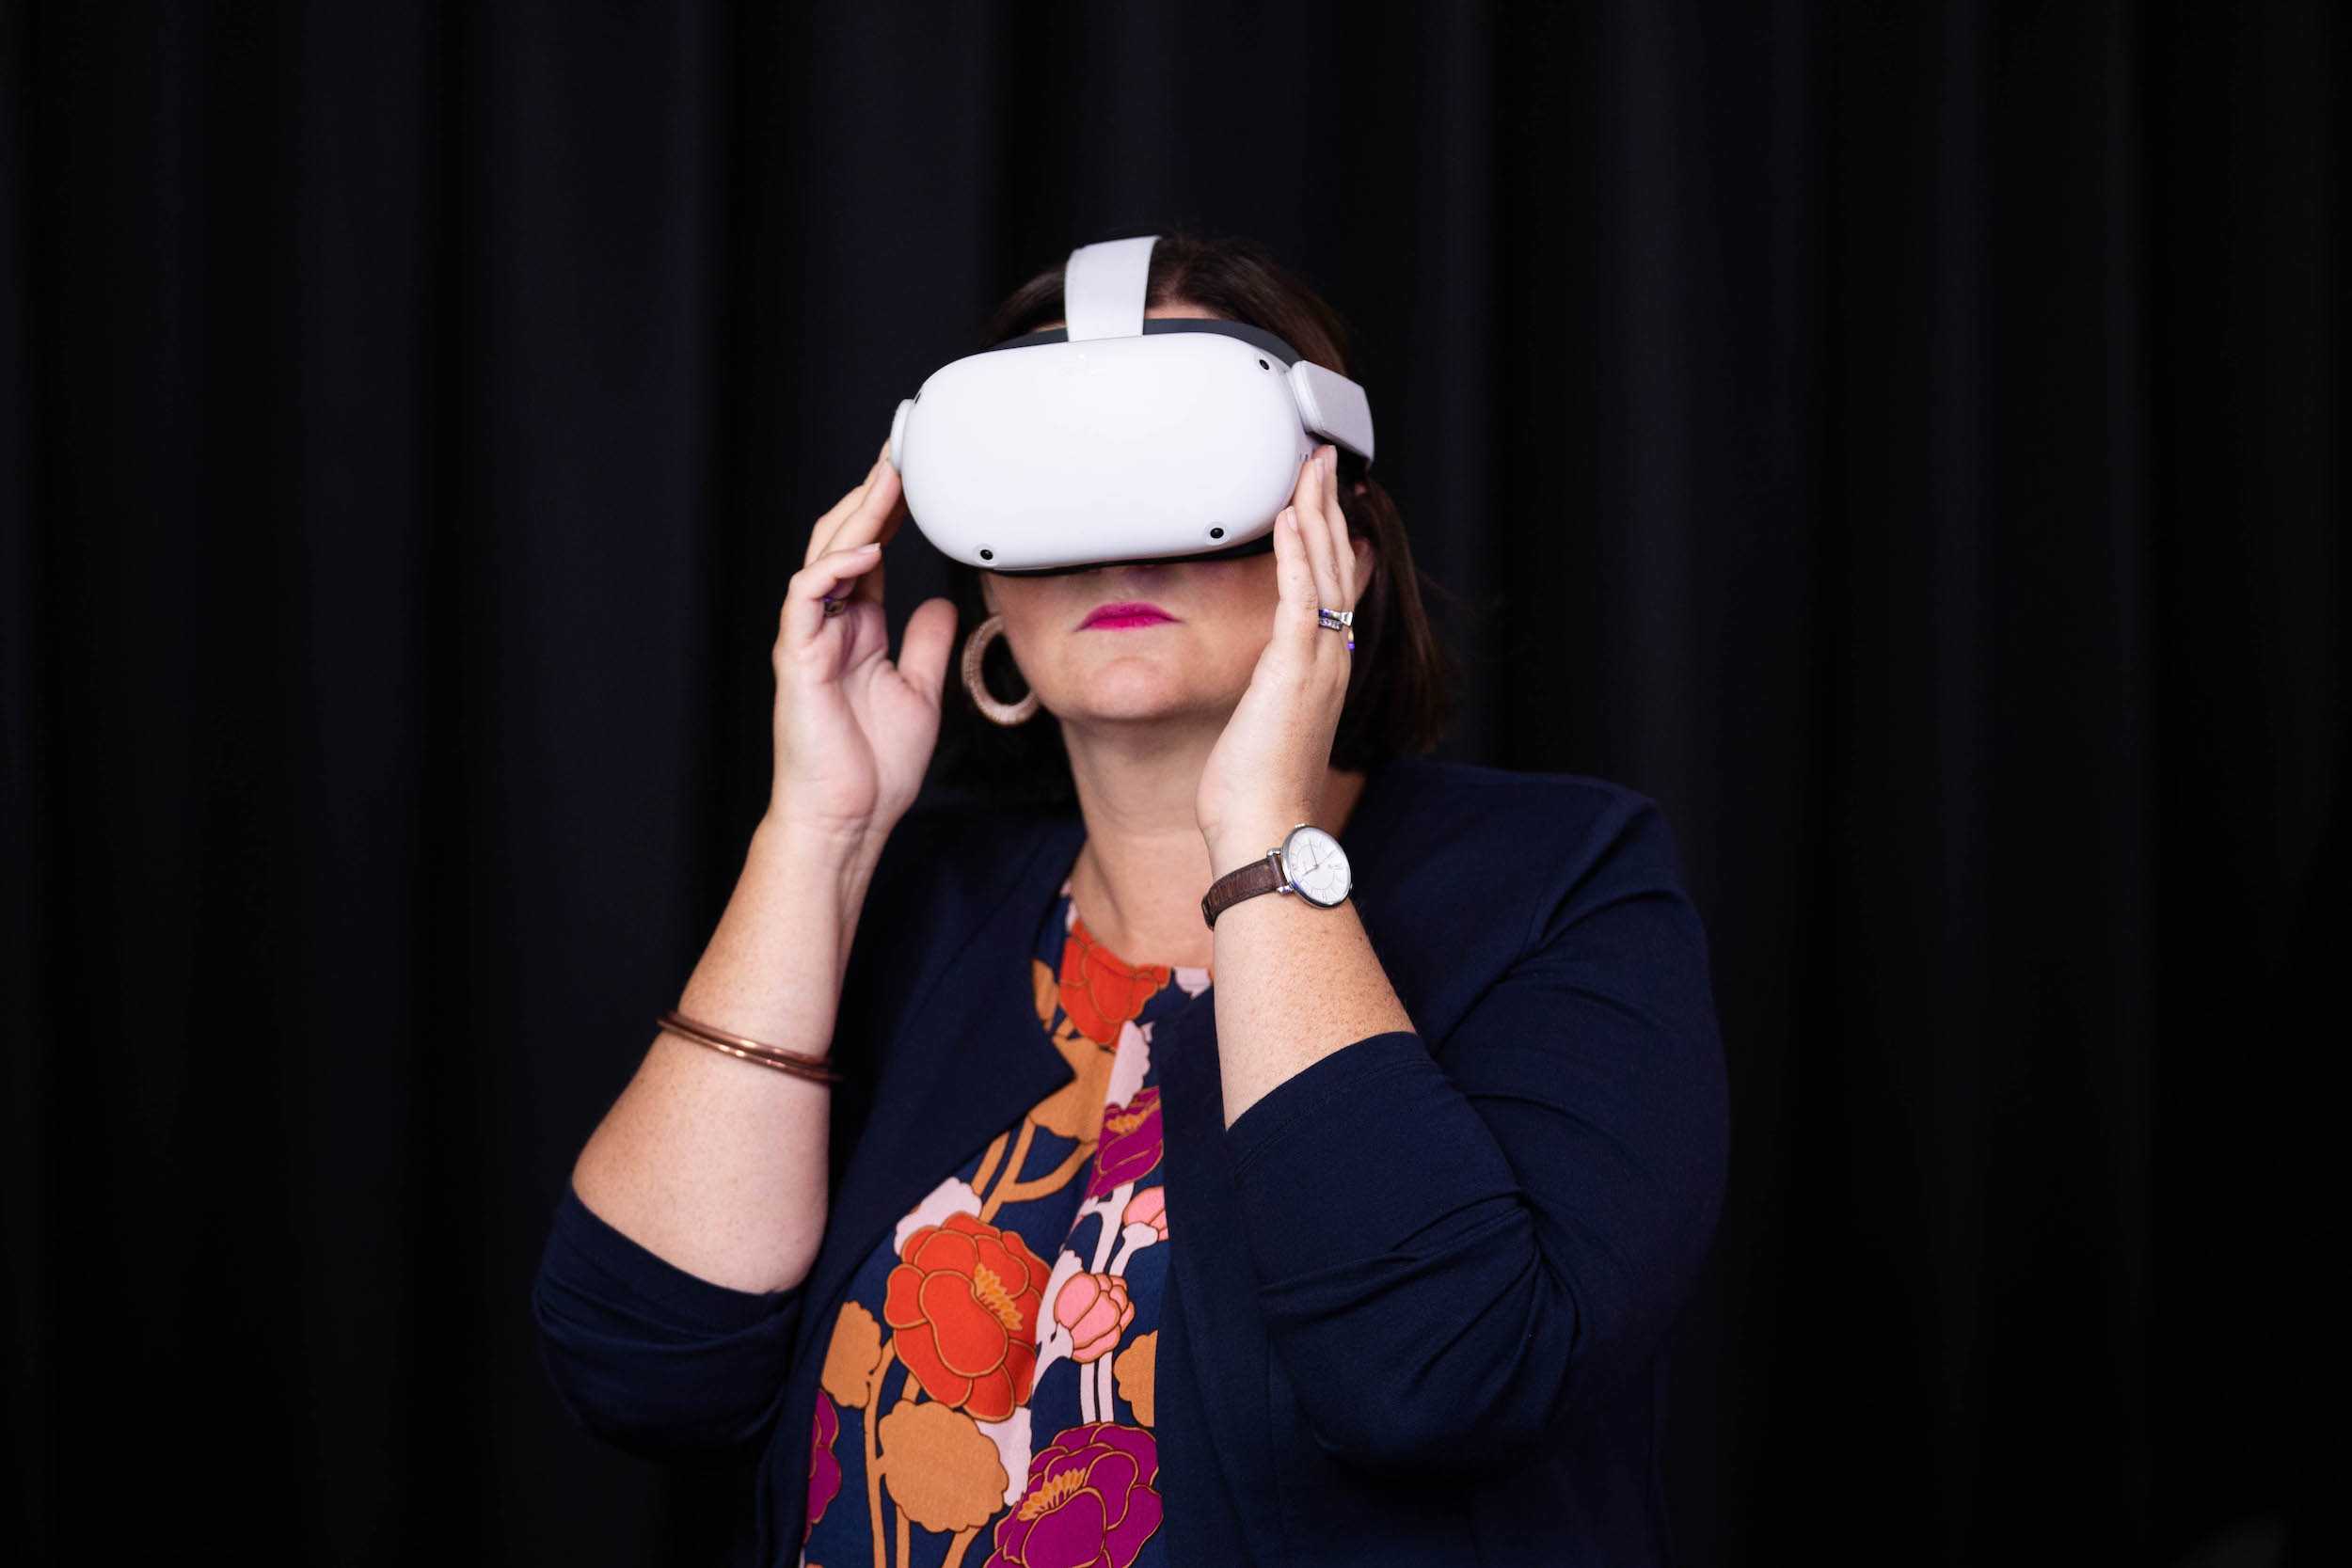 NSW Education Minister Sarah Mitchell viewing the new plans in VR.